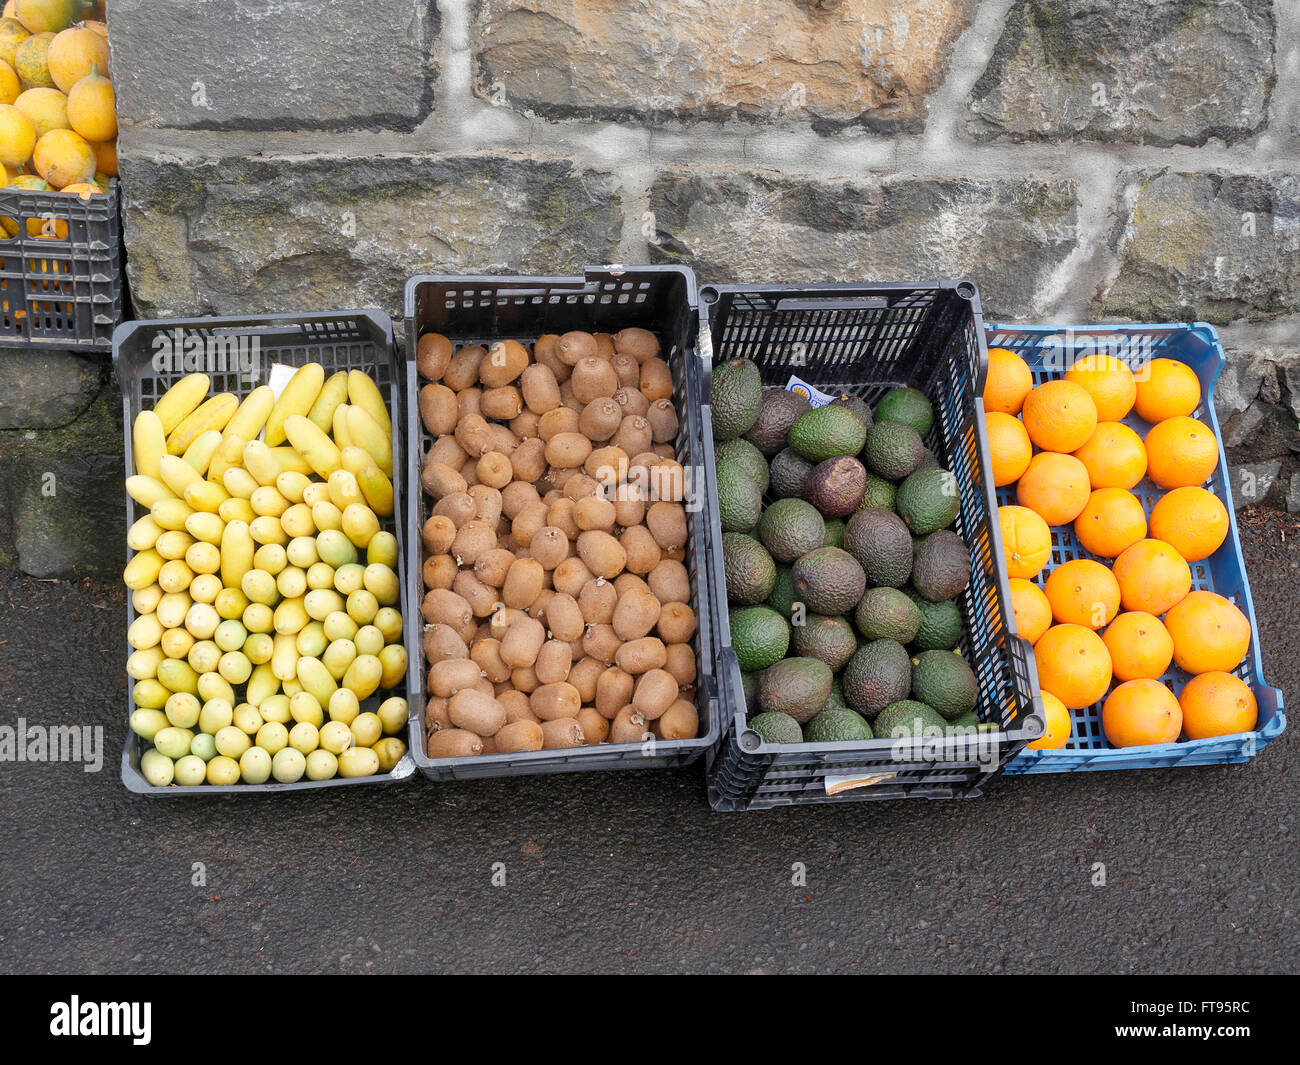 Vegetables for sale in markets, Madeira, March 2016 Stock Photo